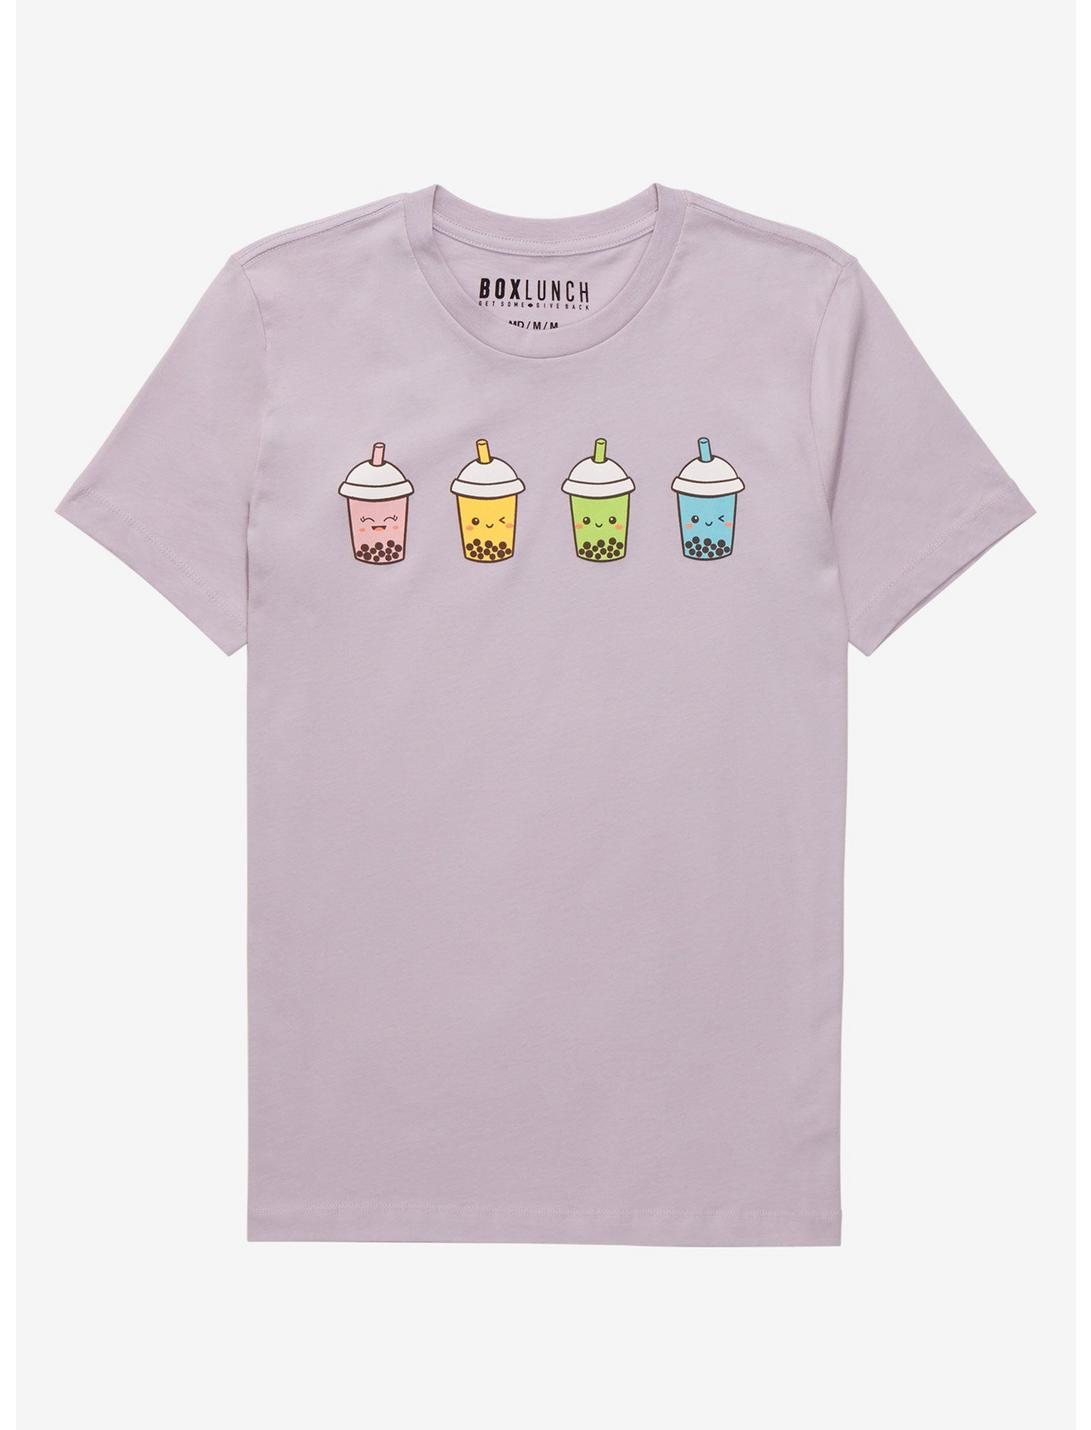 Boba Cups Lineup Women's T-Shirt - BoxLunch Exclusive, LILAC, hi-res